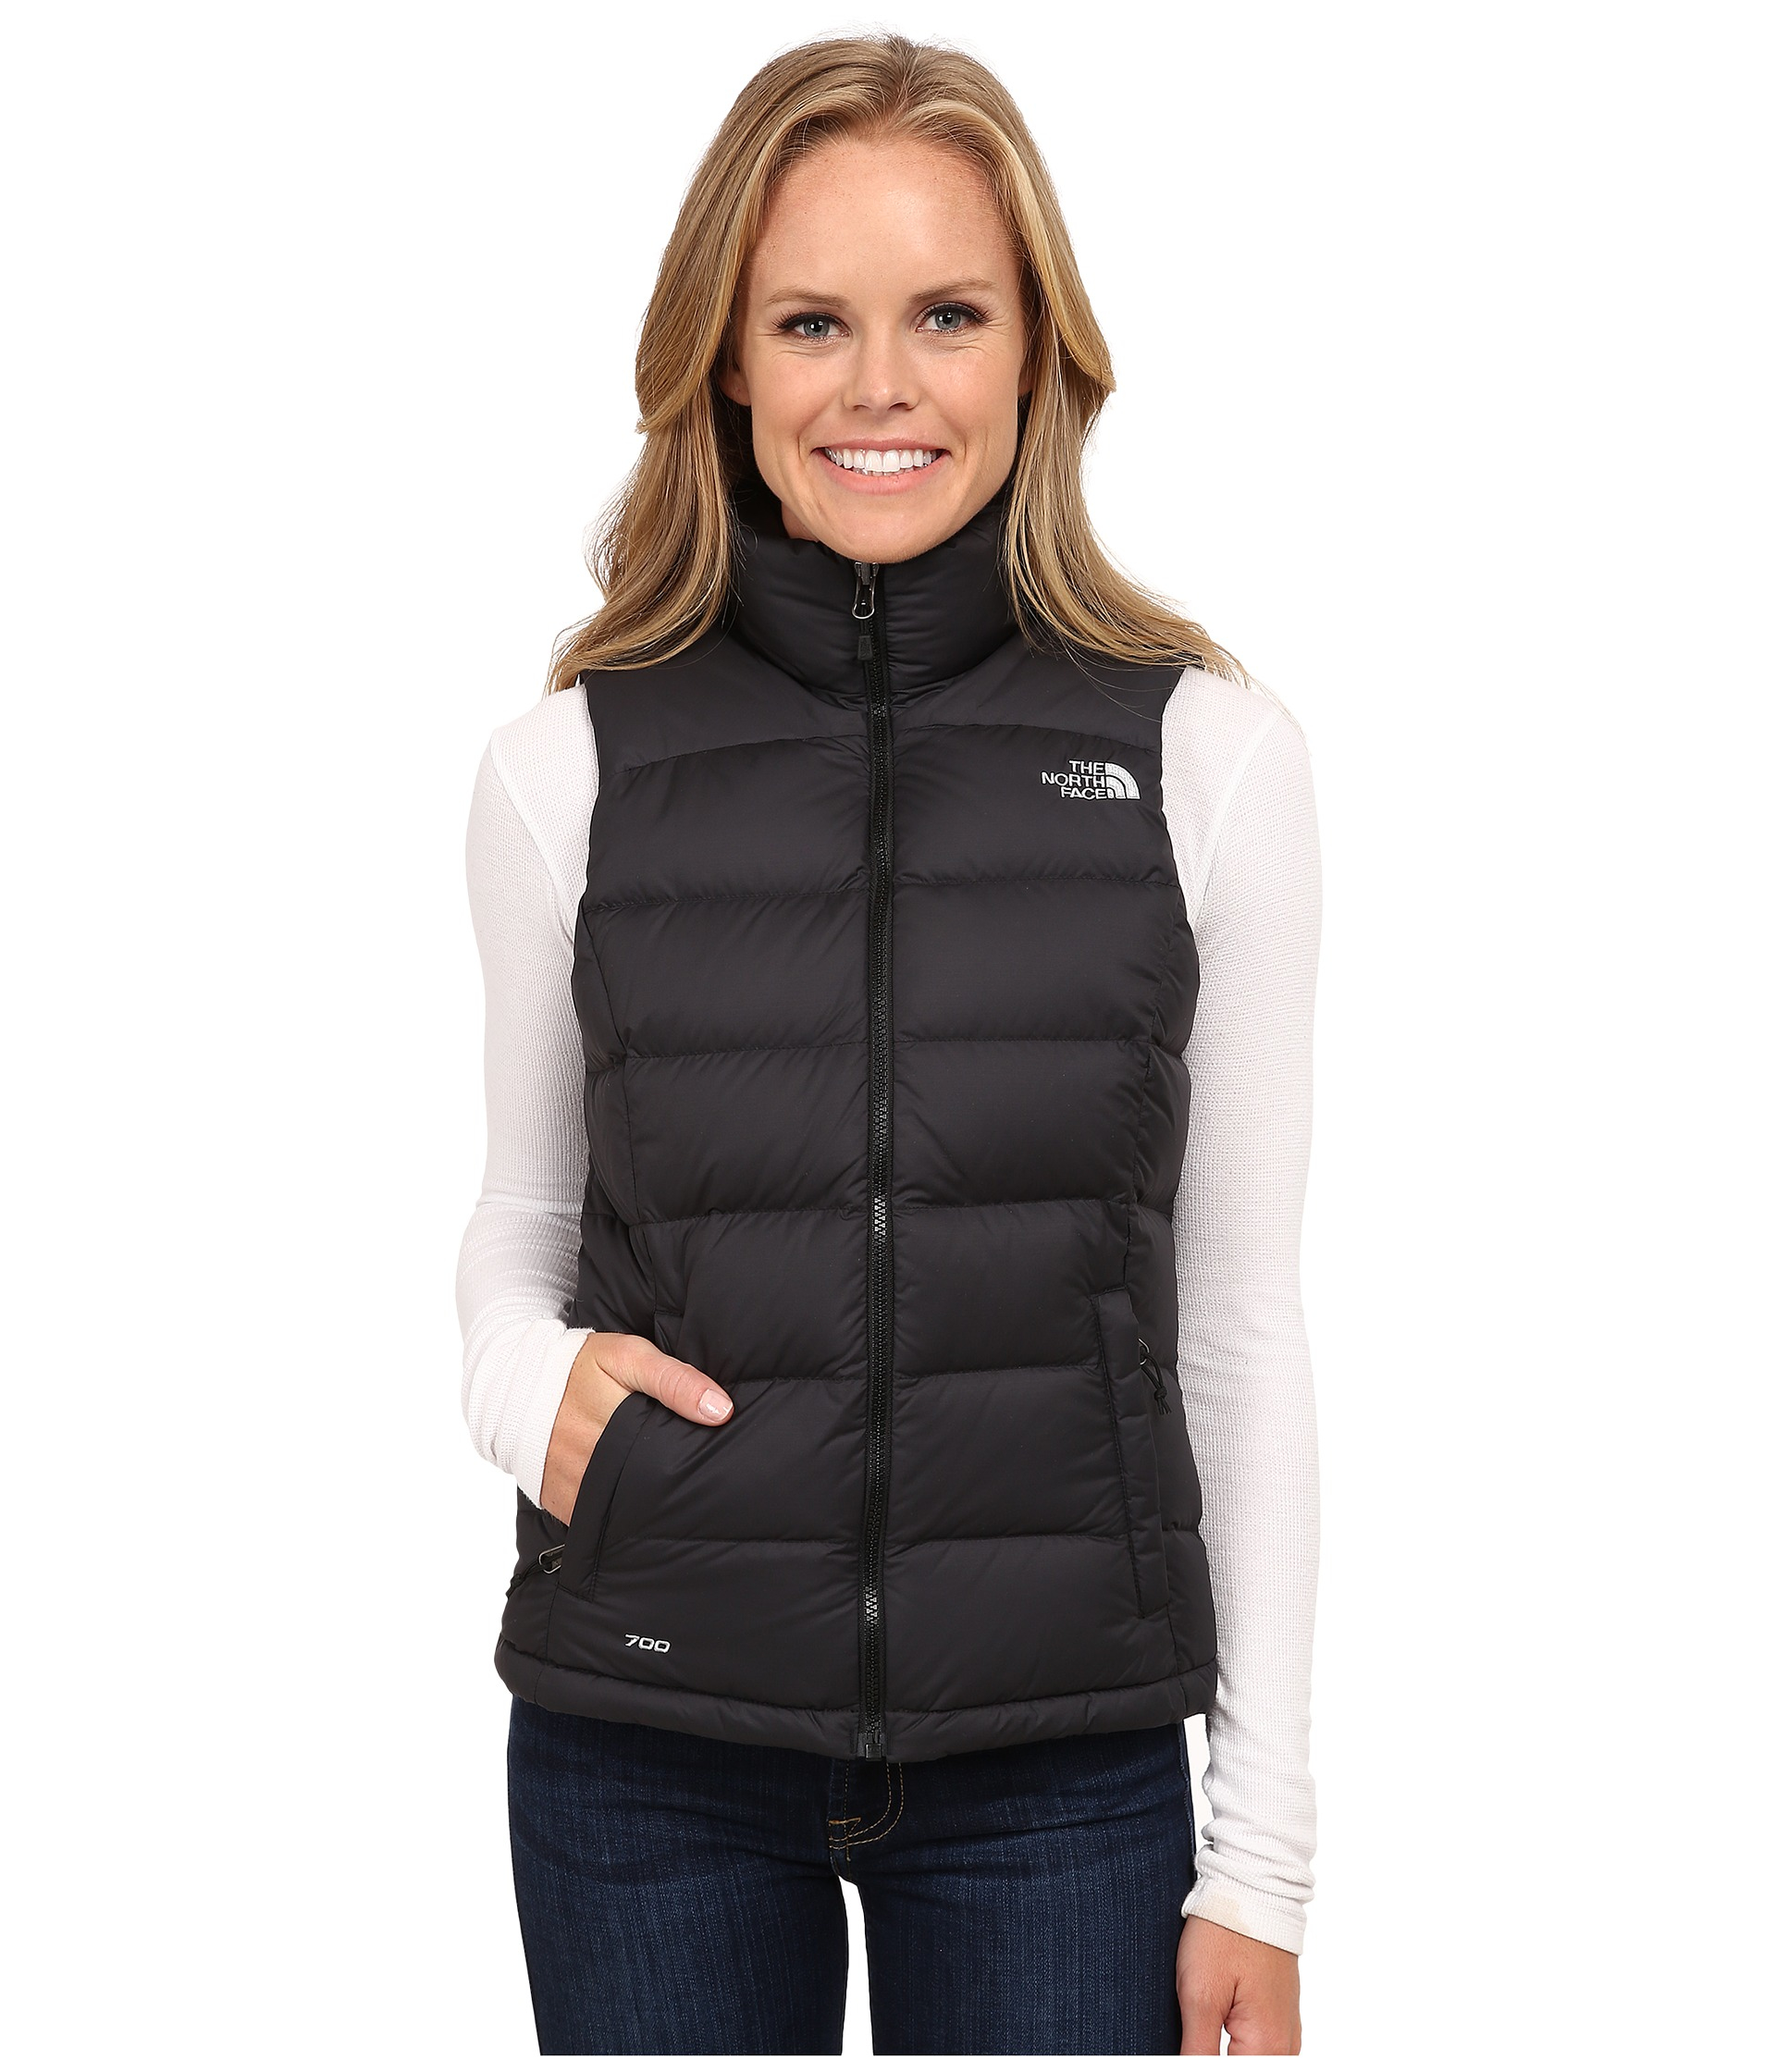 The north face nuptse vest 2 pack 2 – North Face Nuptse Review ...